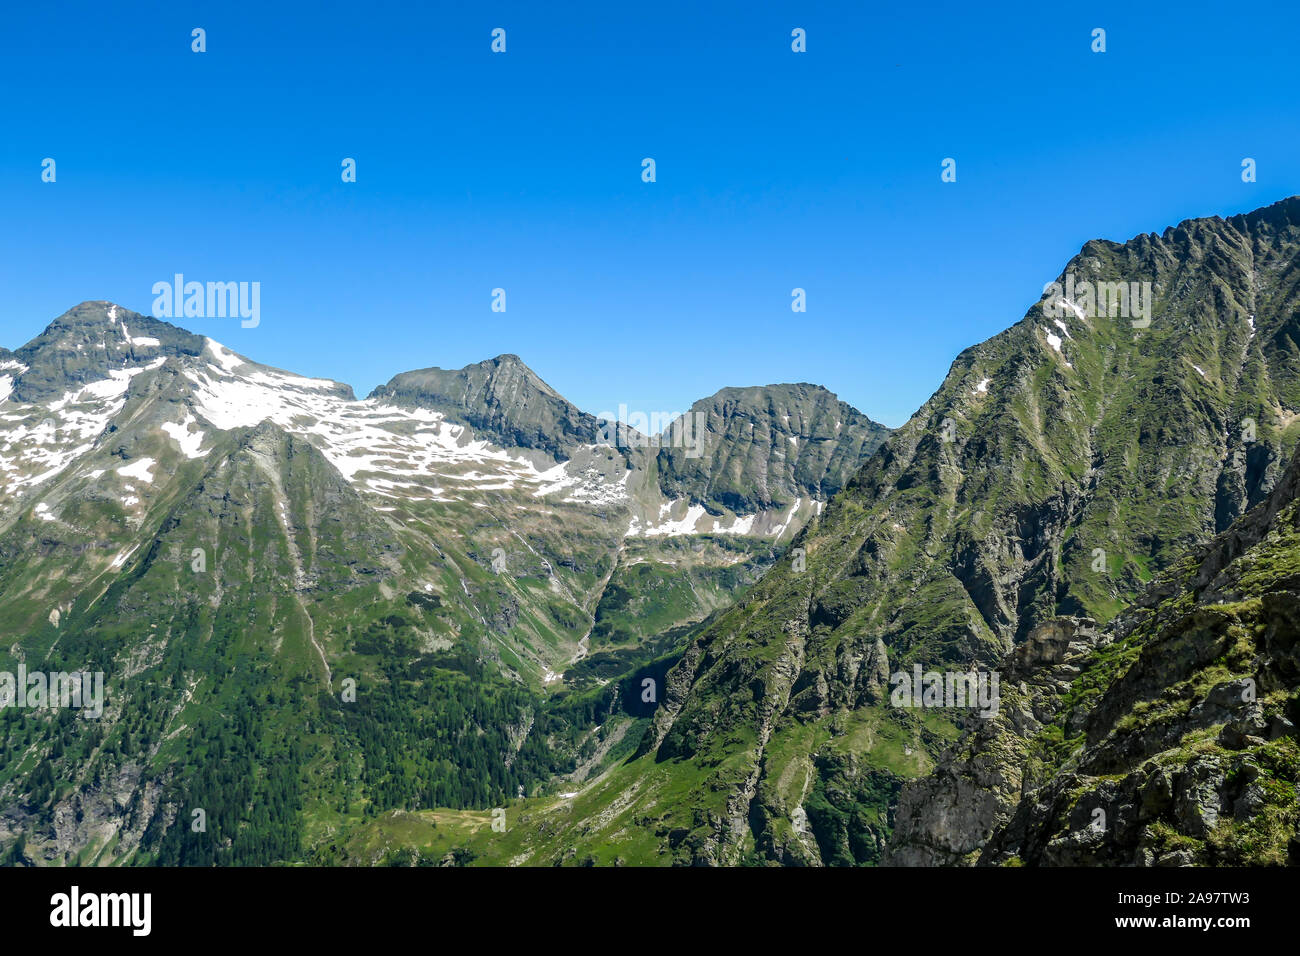 A panoramic view on Schladming Alps, partially still covered with snow. Spring slowly reaching the tallest parts of the mountains. Sharp peaks, slopes Stock Photo